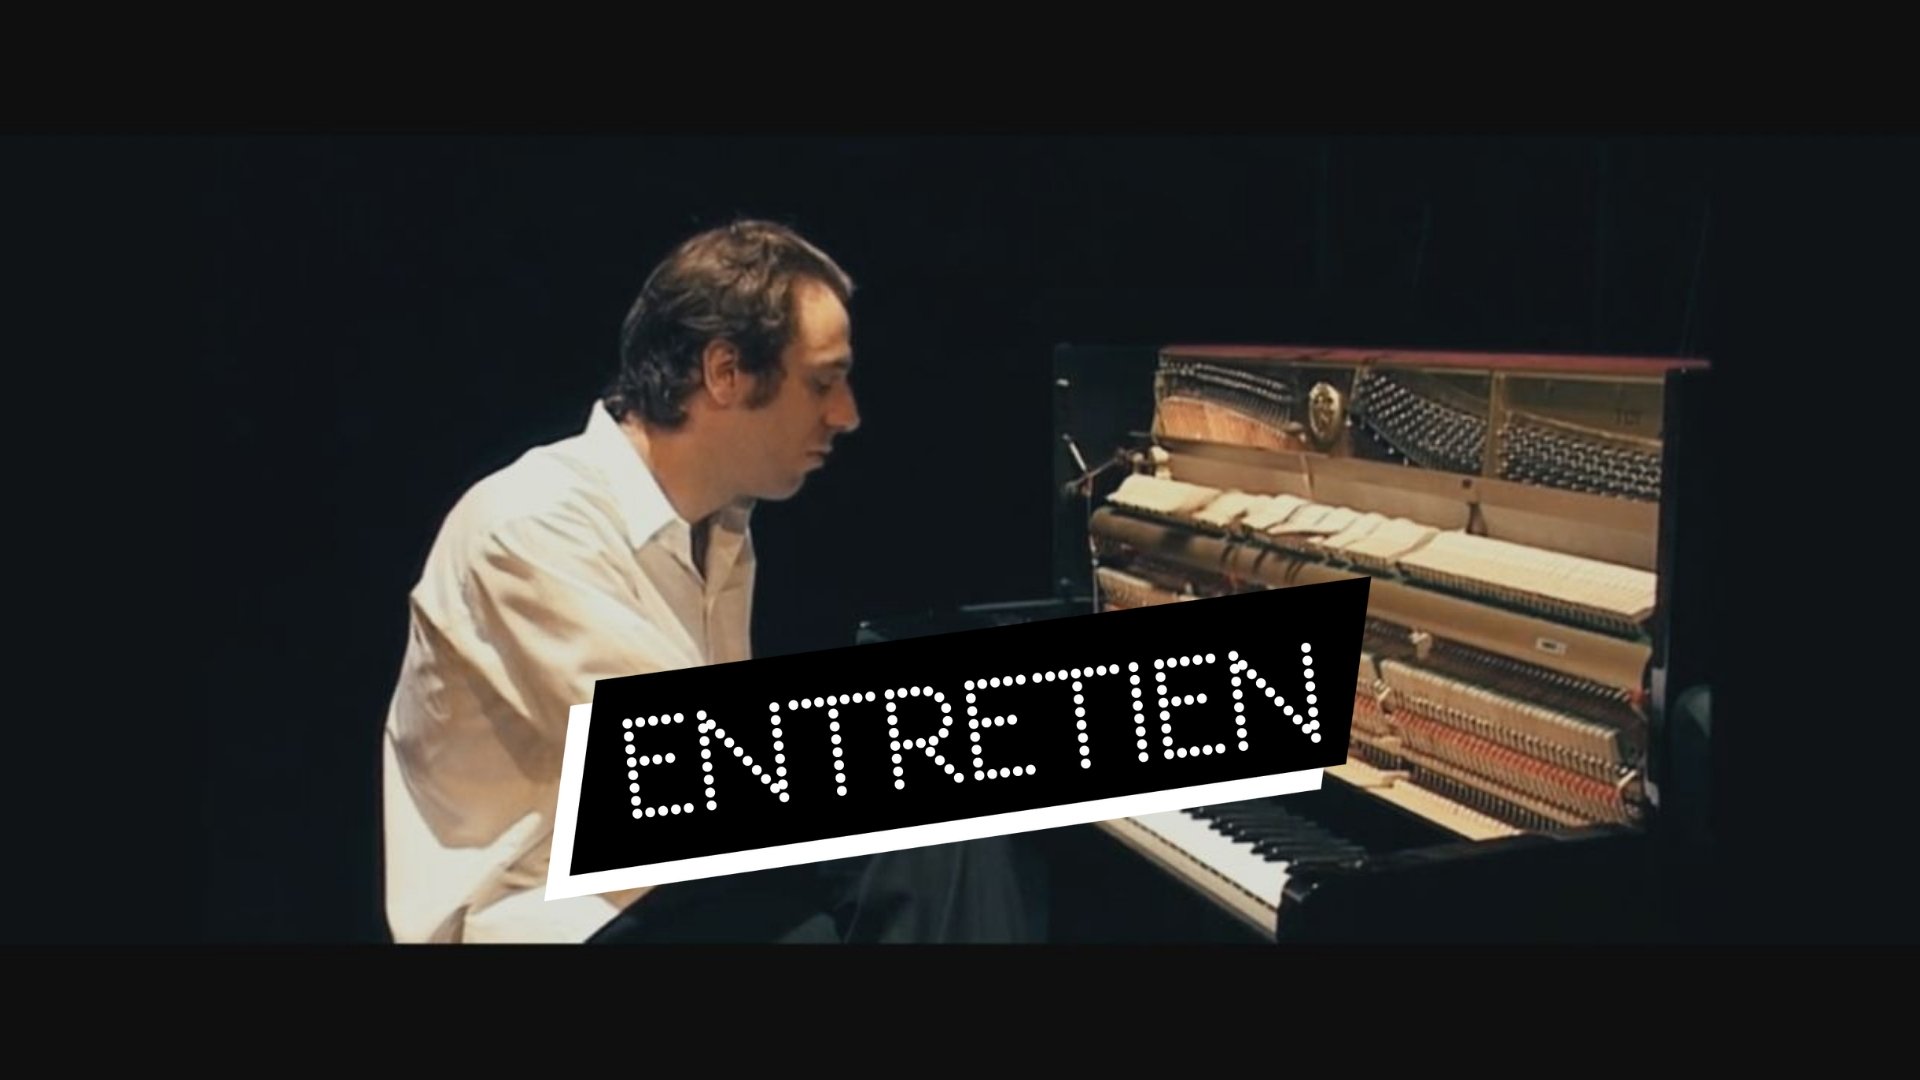 Shut up and play the piano : entretien avec Philipp Jedicke